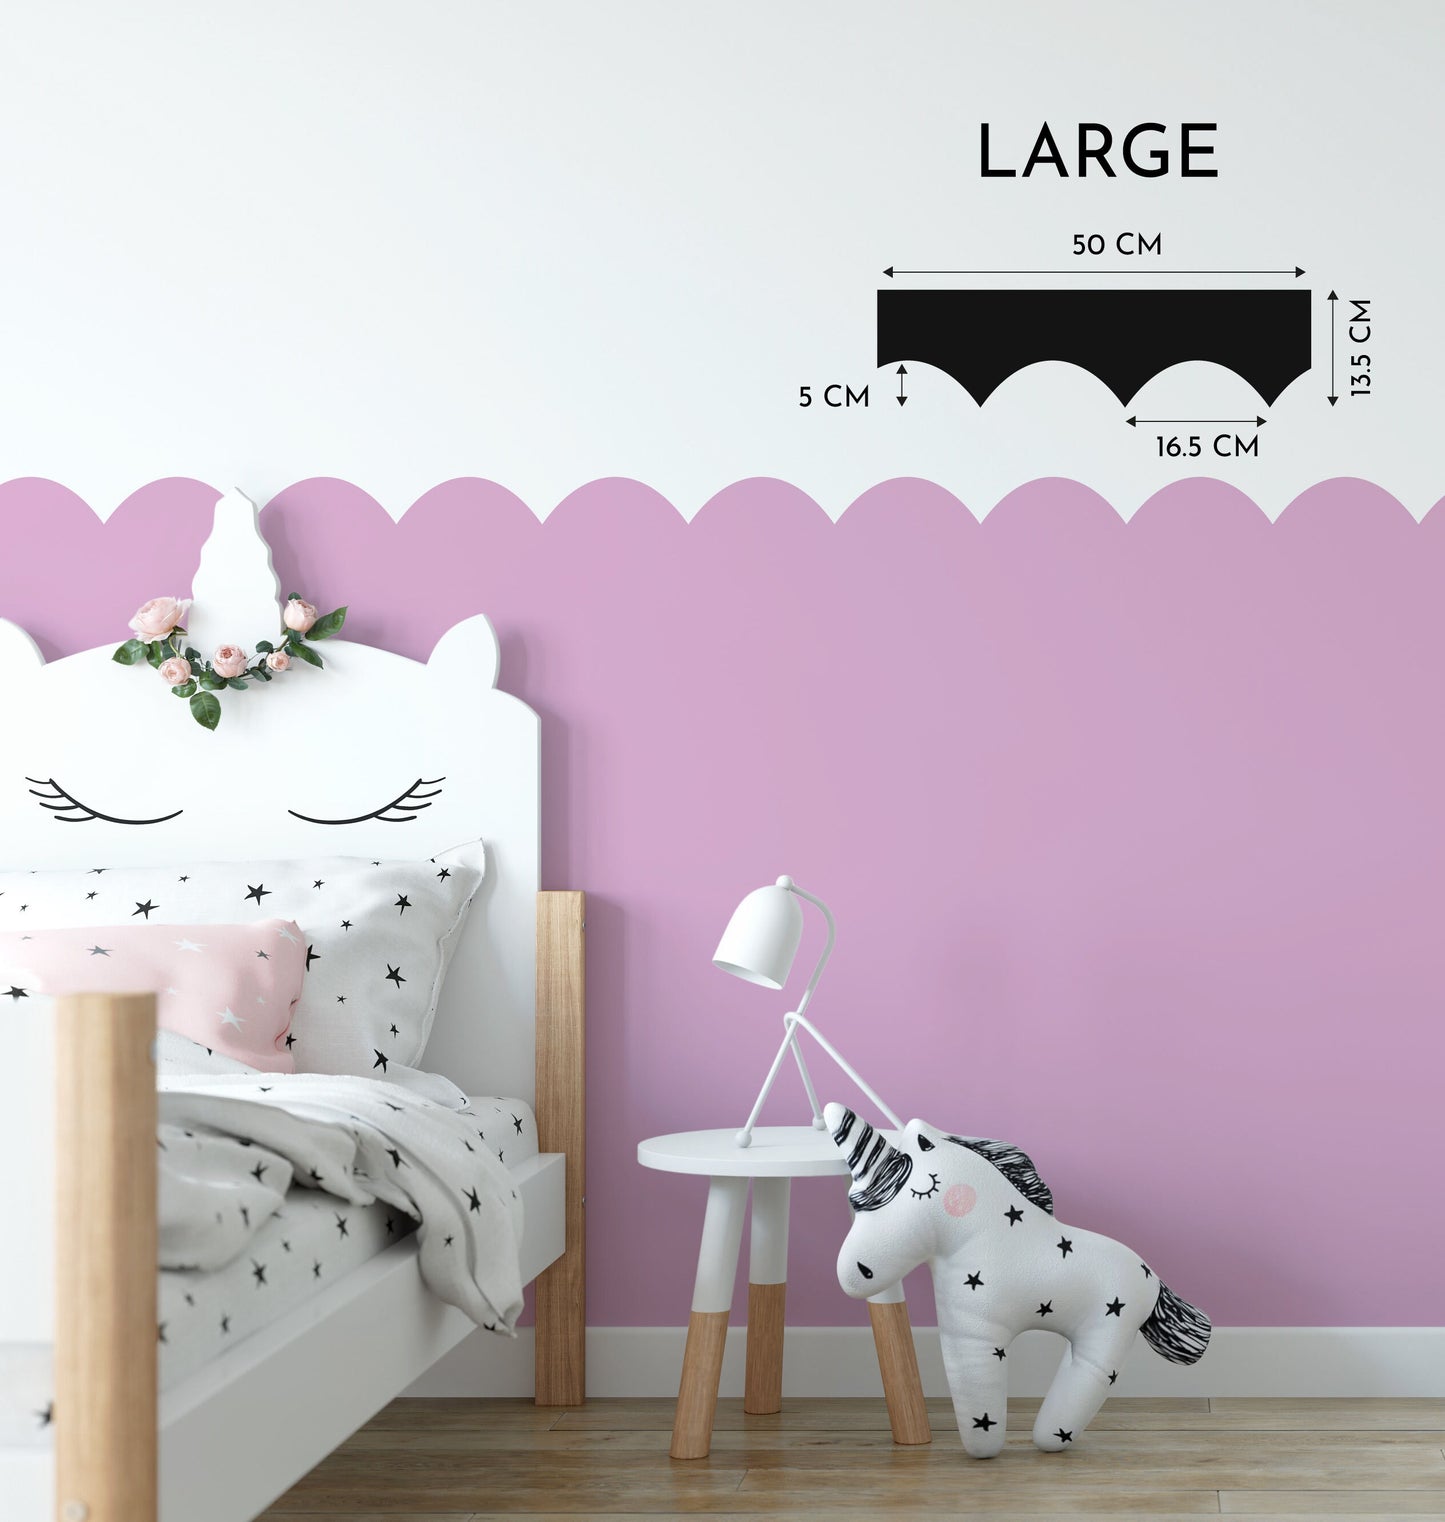 Arch Wall Paint Stencil For Nursery Rooms & Children's Bedrooms | Wall Boarders Removable For Painting